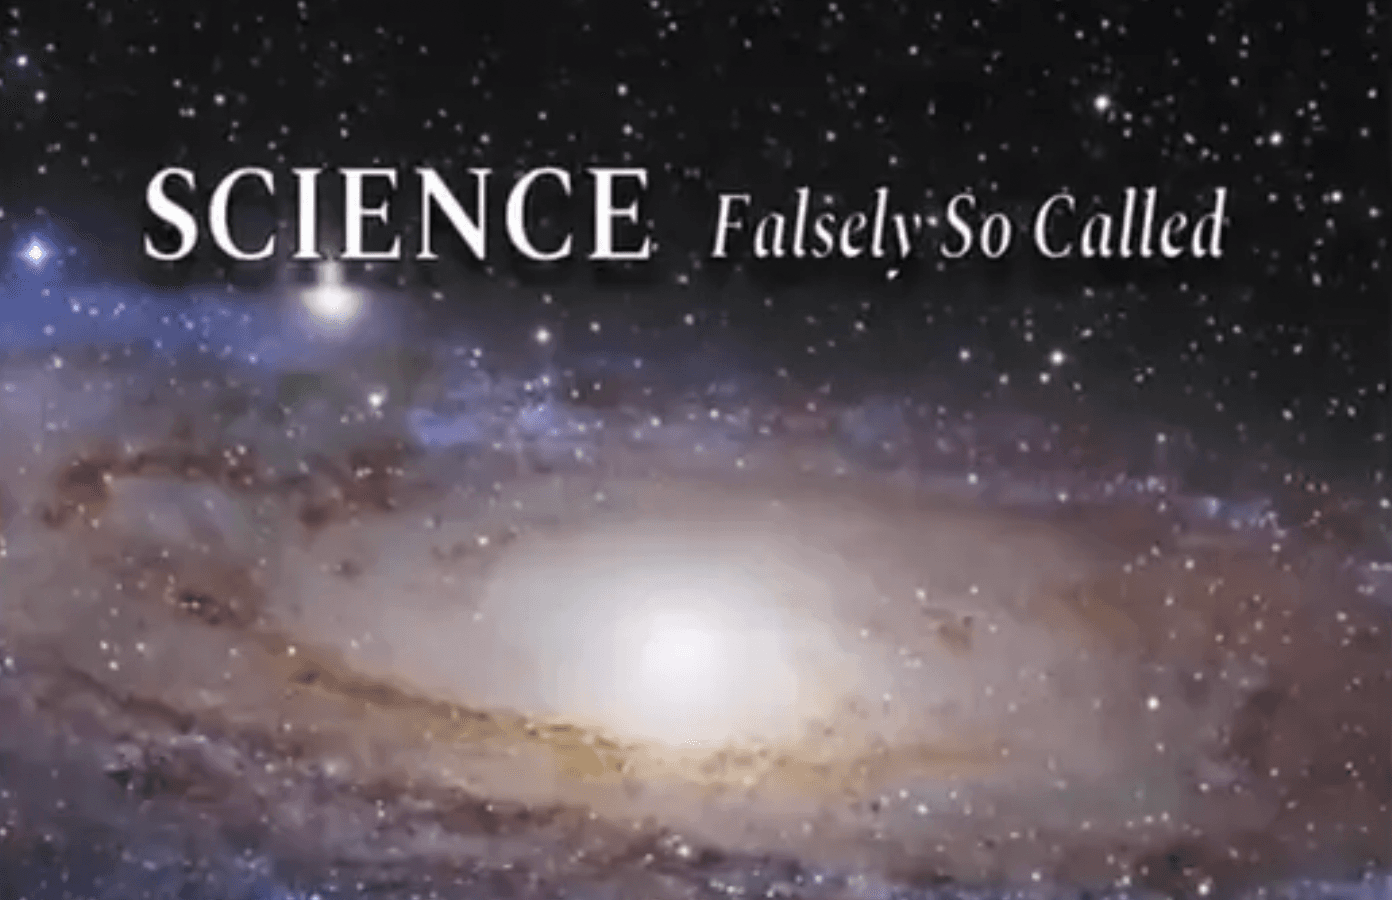 SCIENCE Falsely So Called